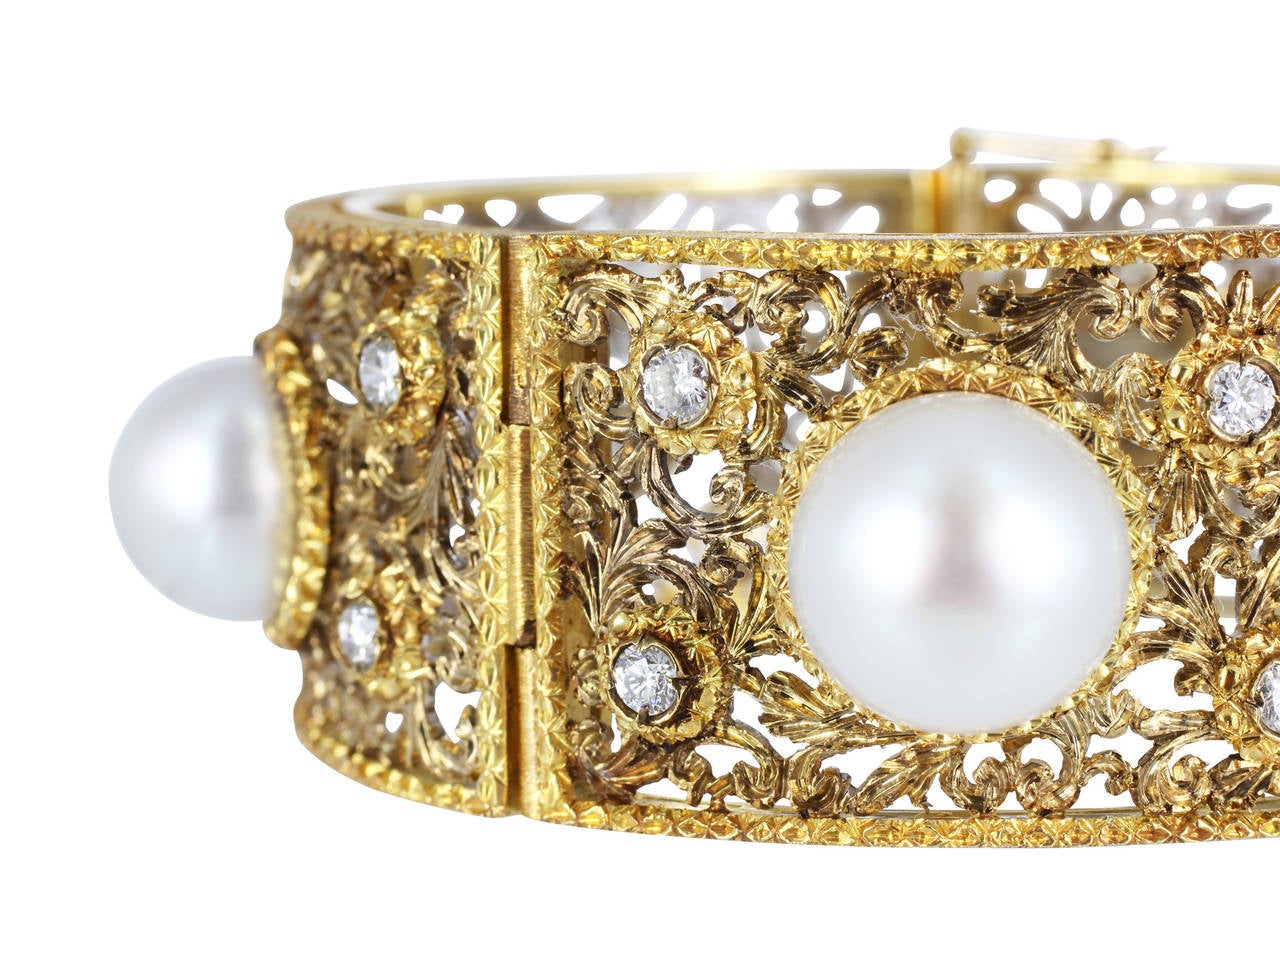 Two tone 18 karat white and yellow gold open work bracelet set with five 11.50-11.75mm South Sea pearls and full cut diamond accents, signed M. Buccellati.